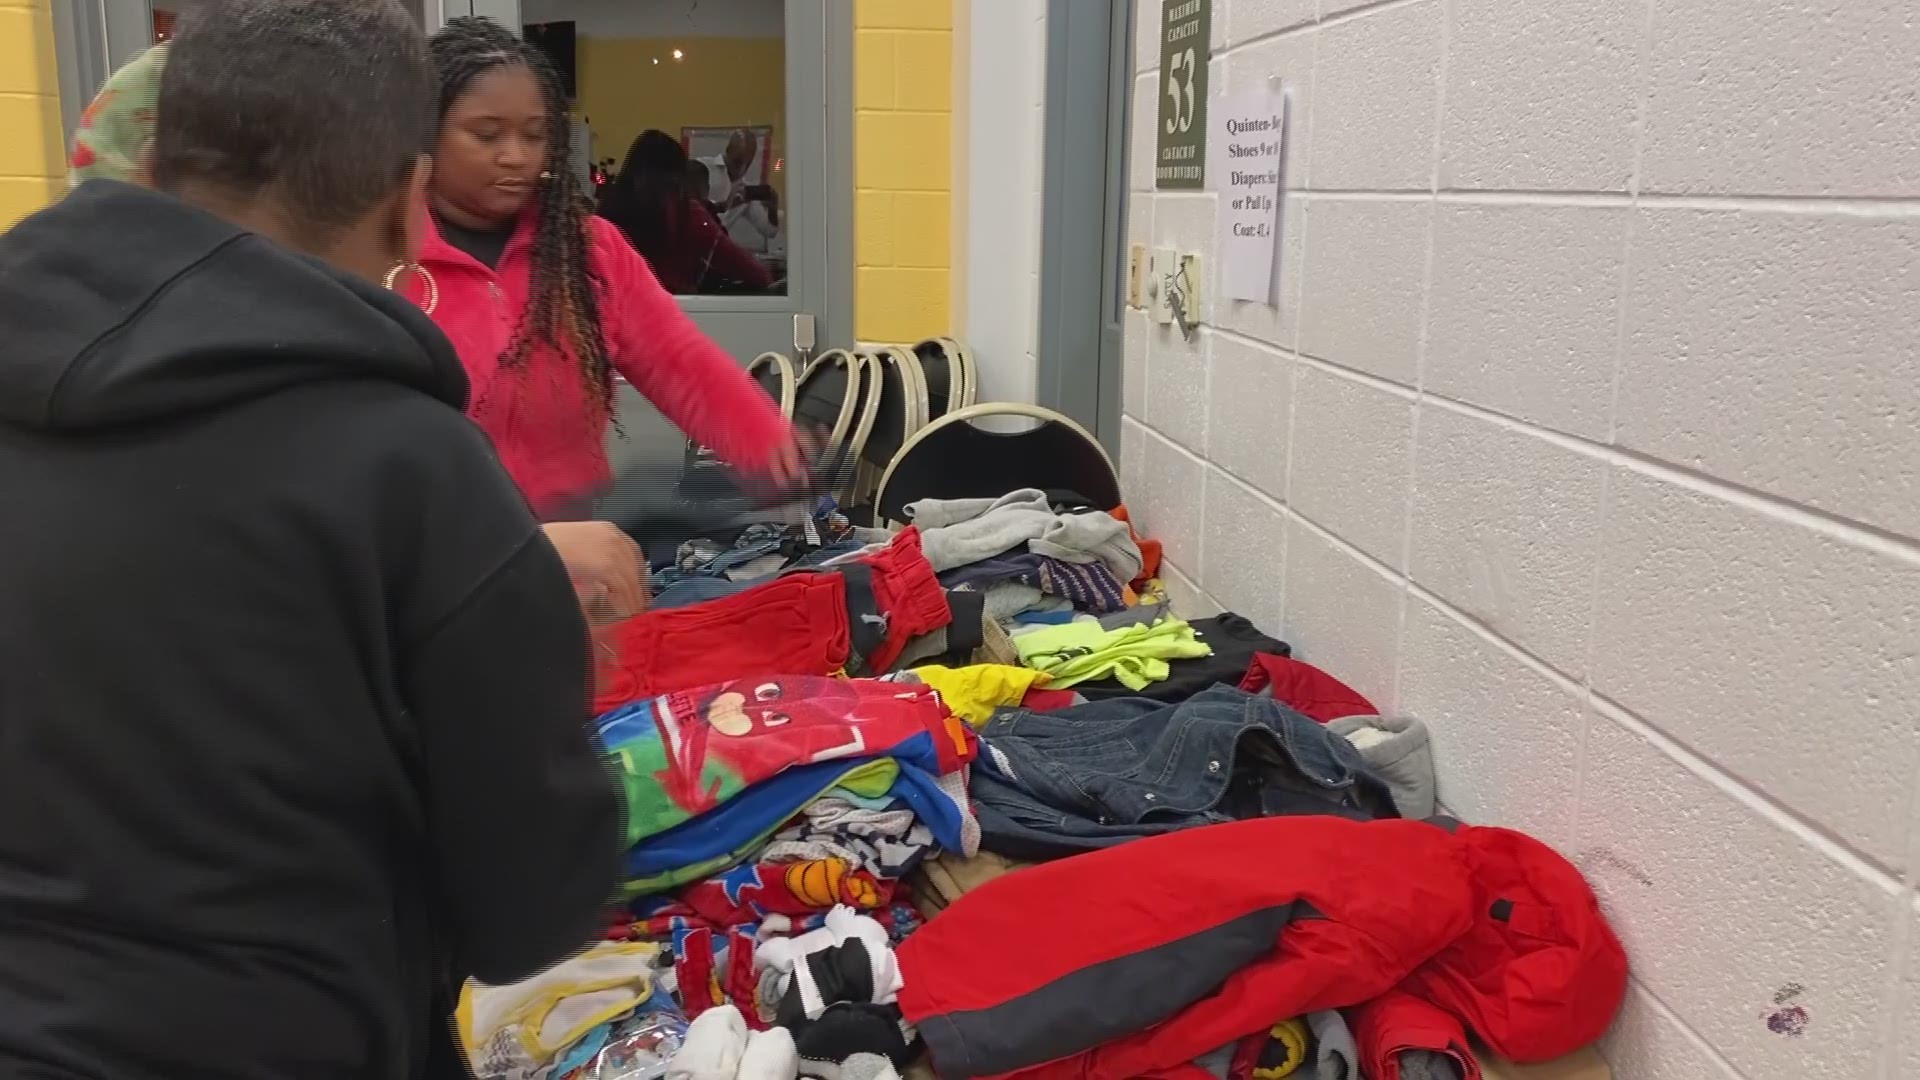 "The love is just so overwhelming," James Caviness-Bey said as he walked into a donation drive organized by his neighborhood commissioner, LaRoya Huff.